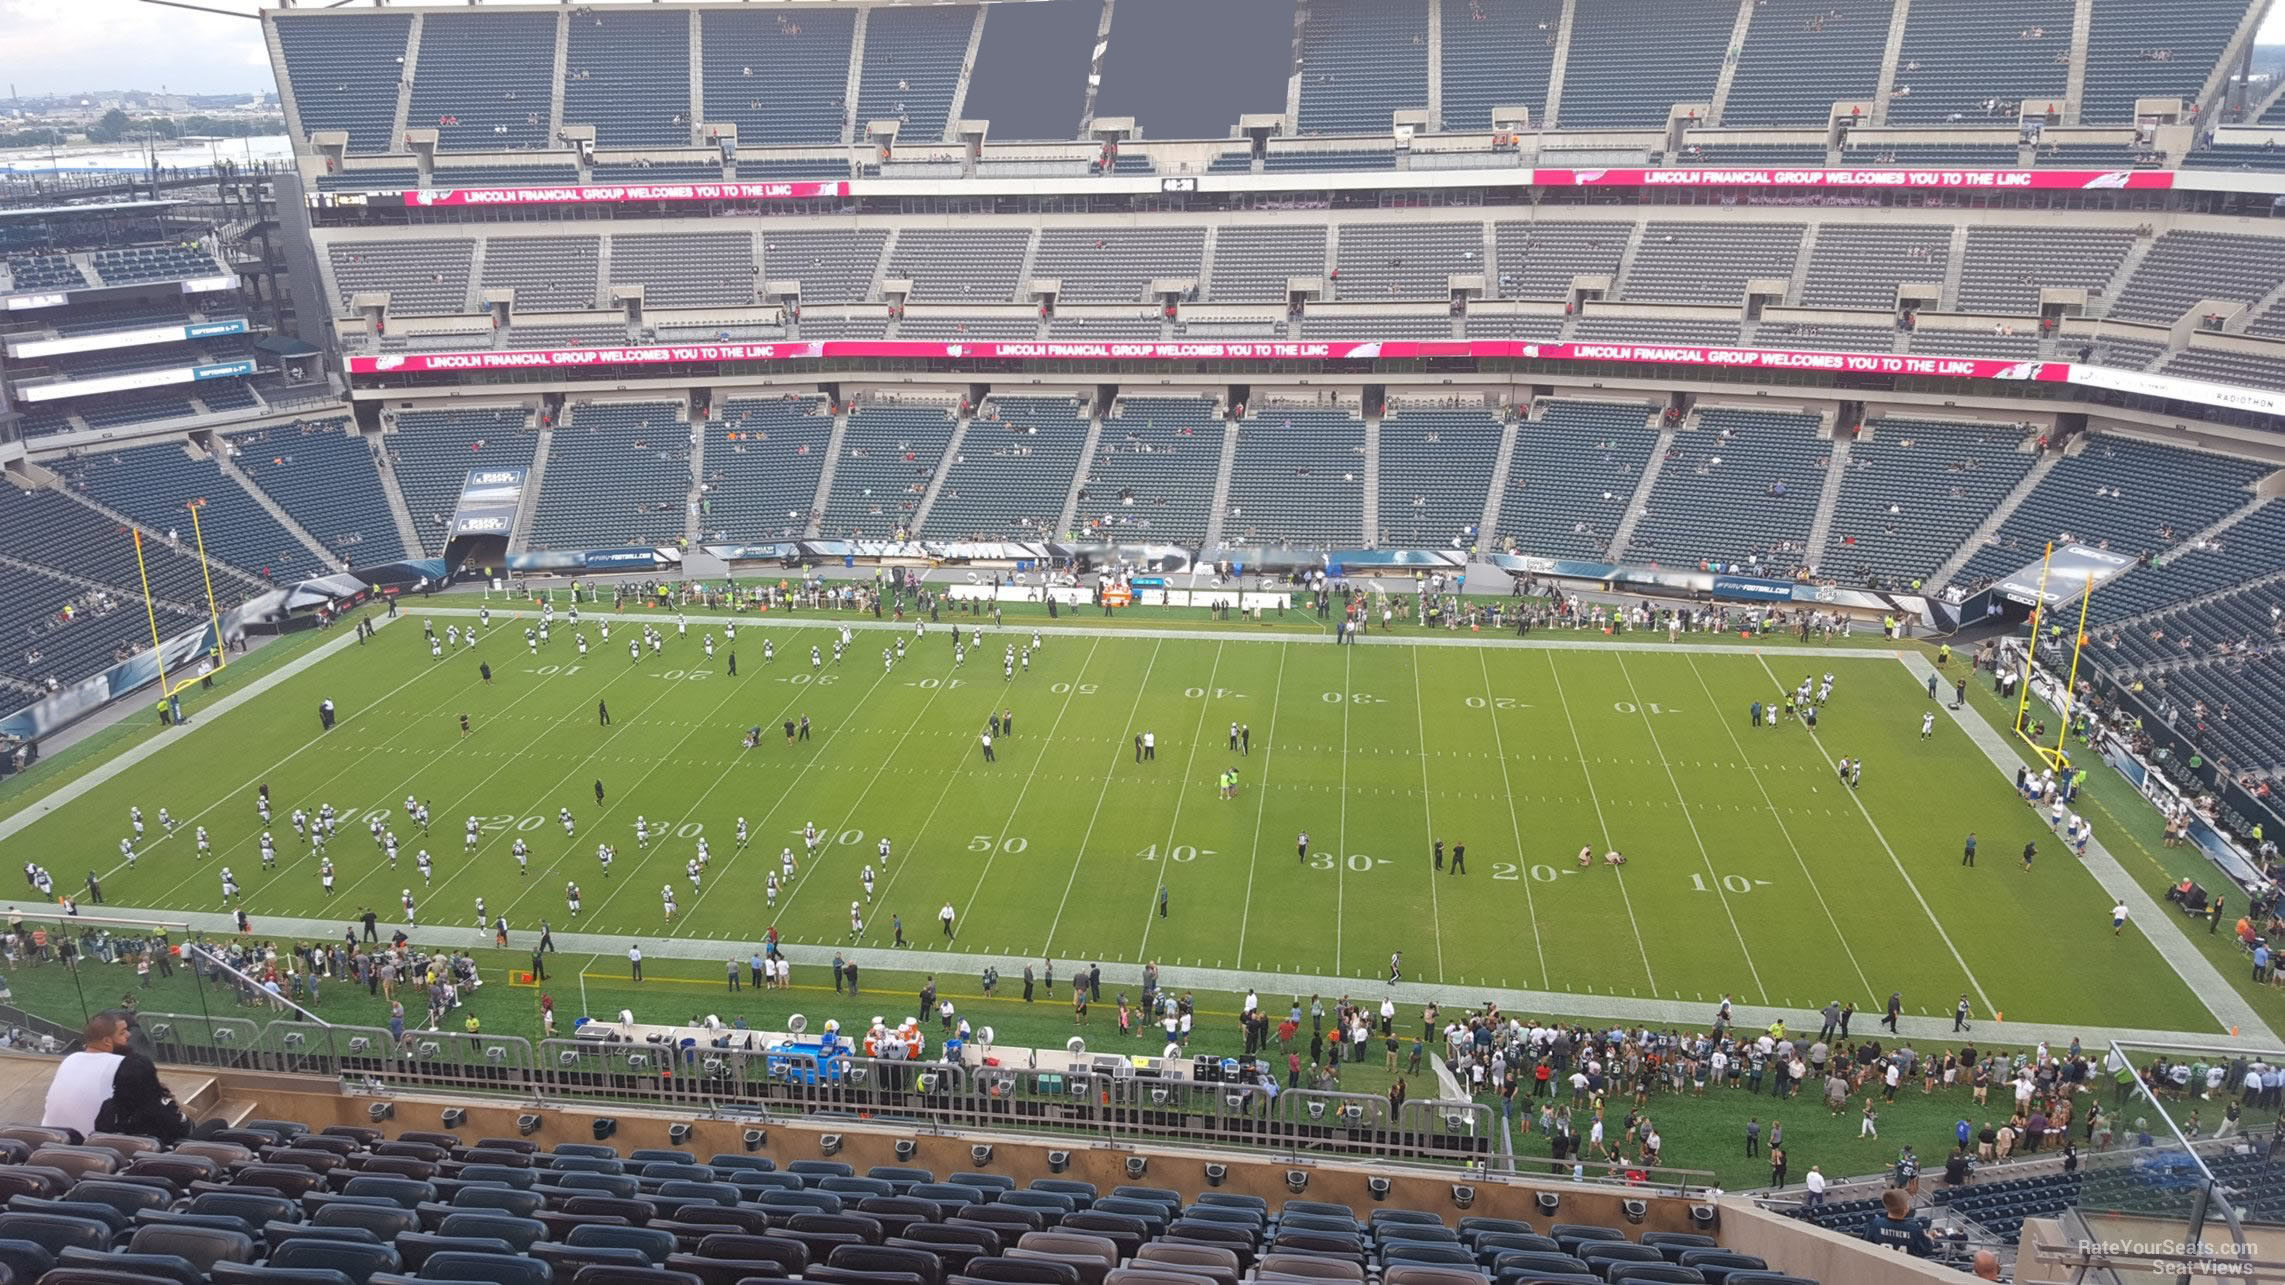 section 202, row 15 seat view  for football - lincoln financial field